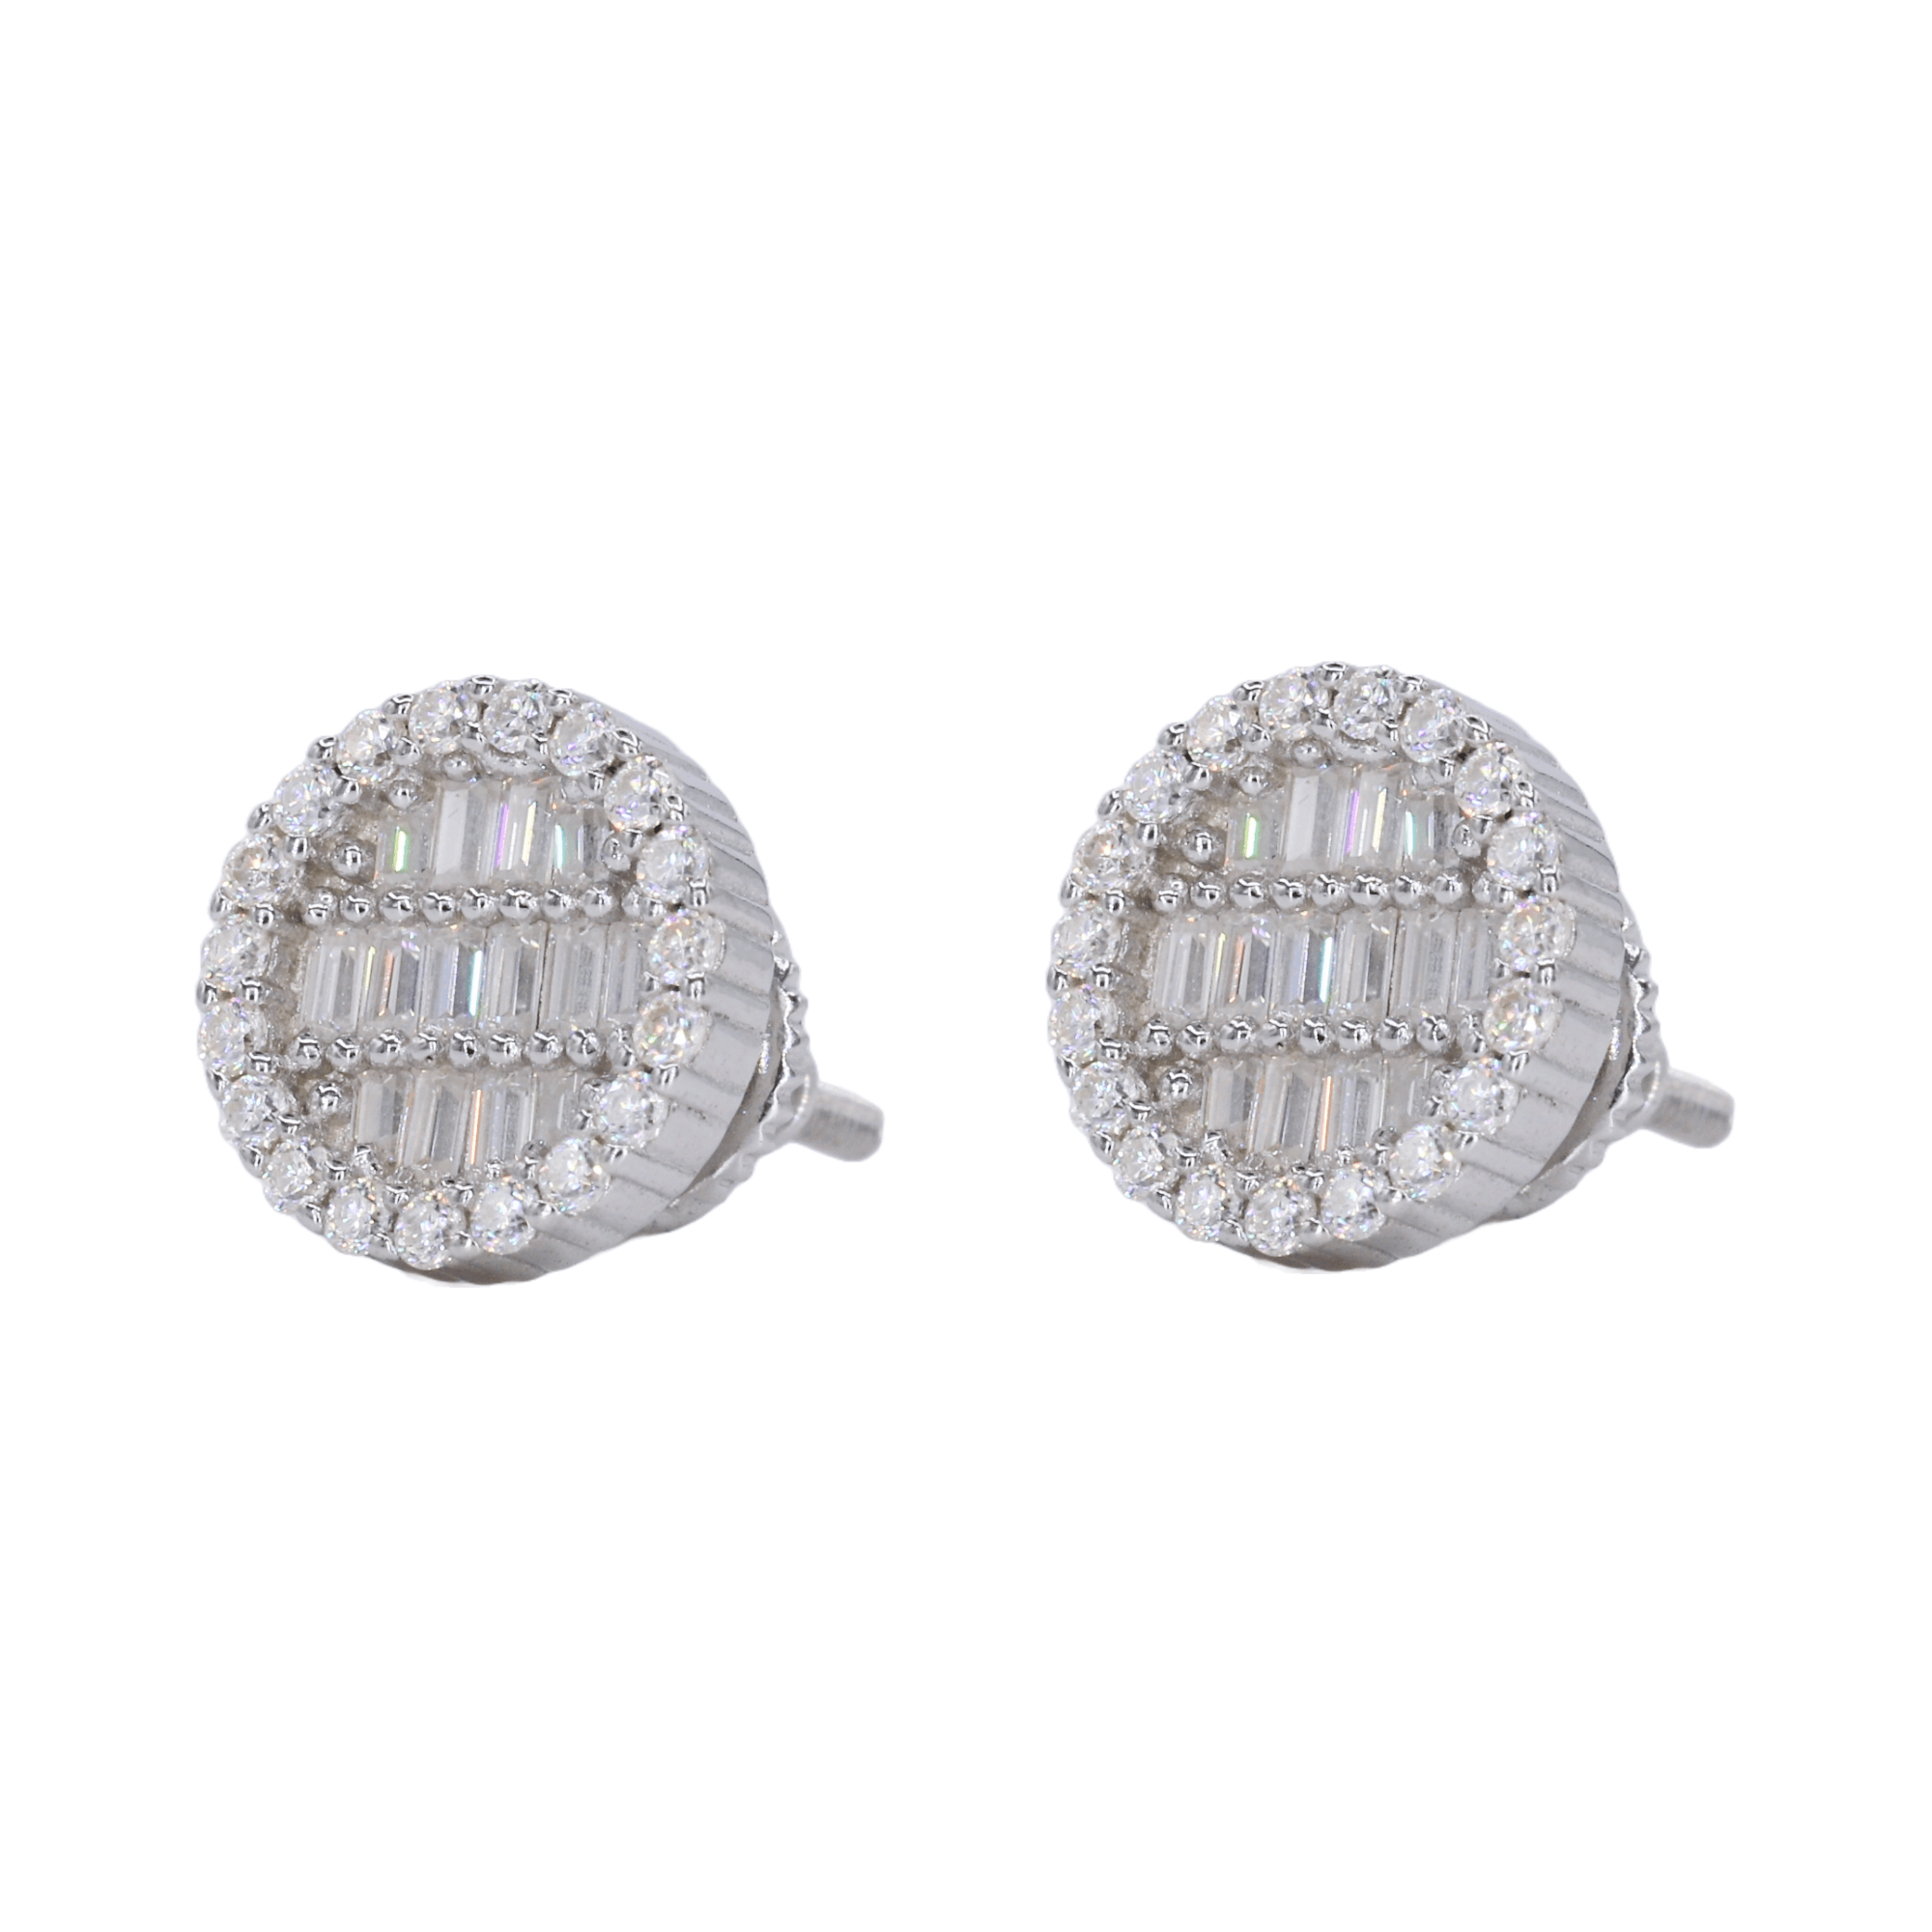 Real 925 Silver Round Earrings 2.6ct Moissanite Passes Diamond